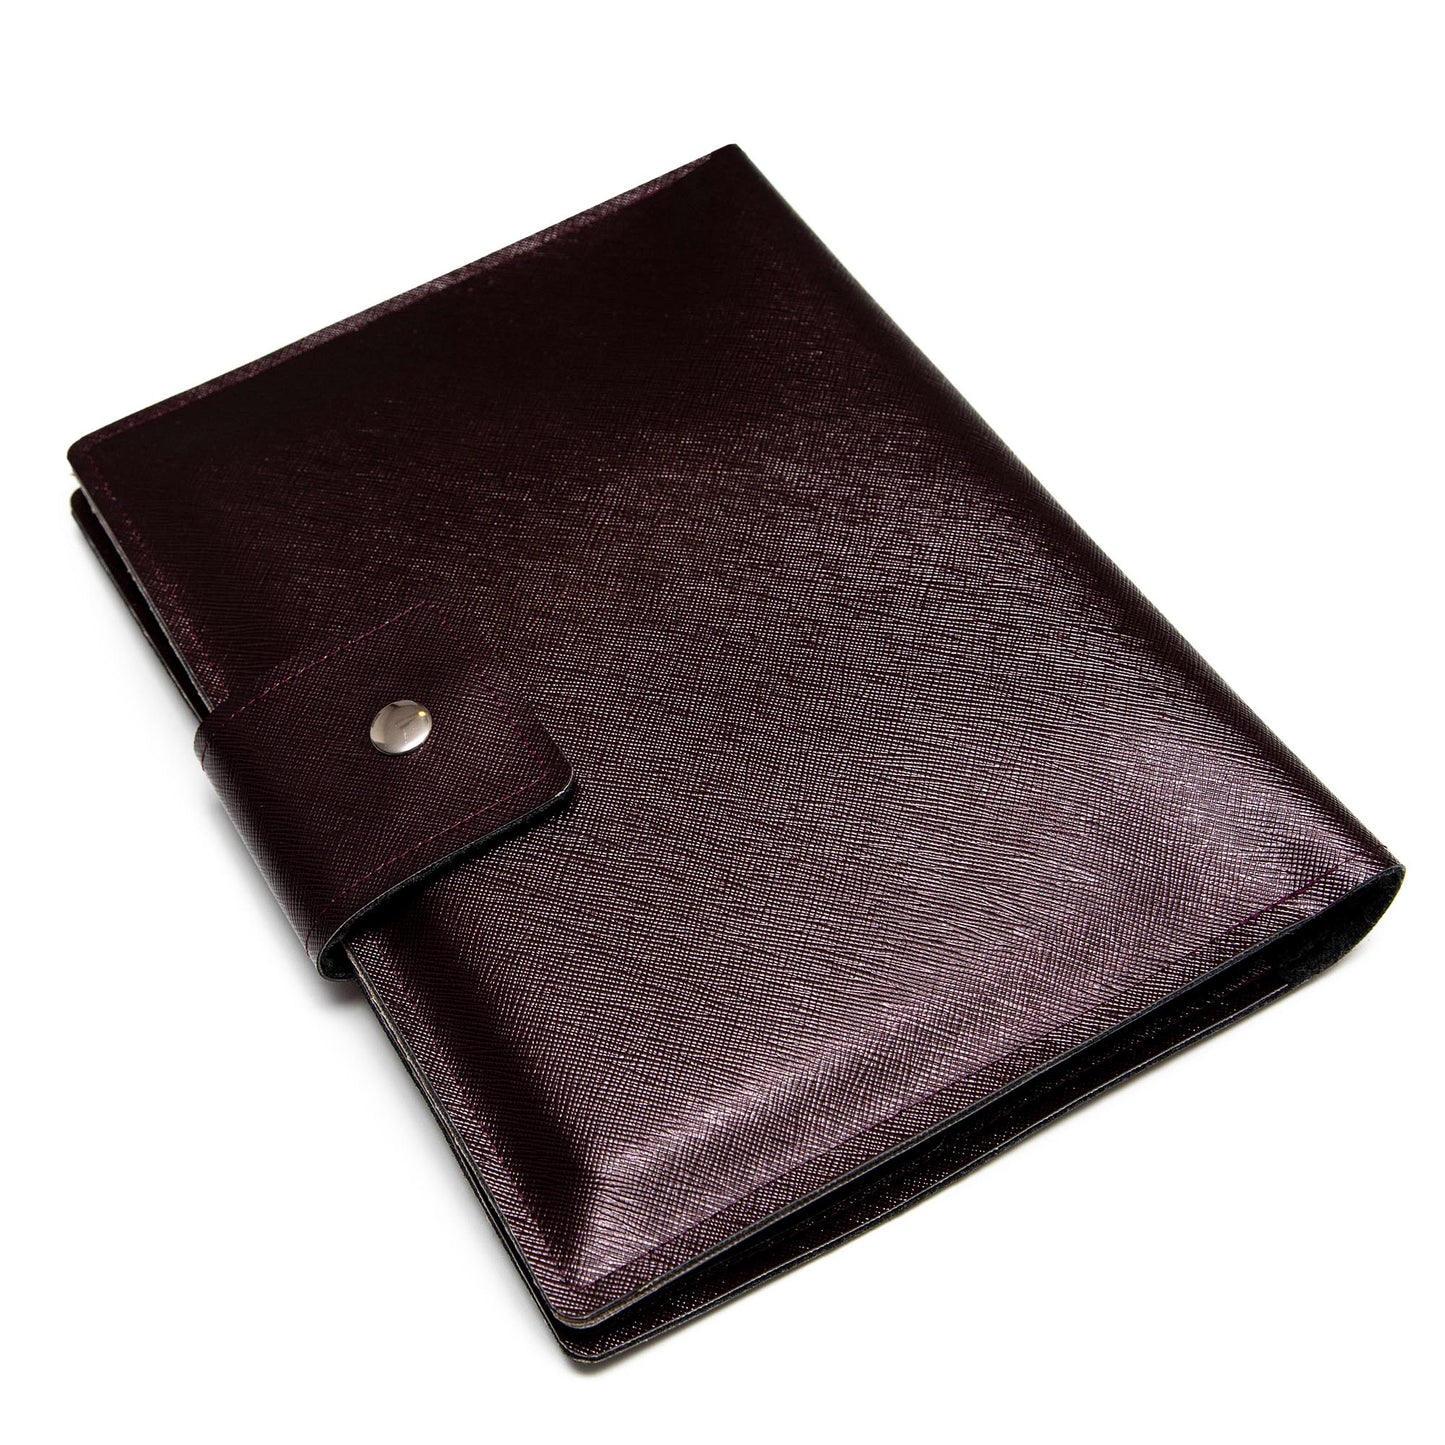 Handmade Folio Cover for iPad/Pro/Air - Egg Plant Faux Leather